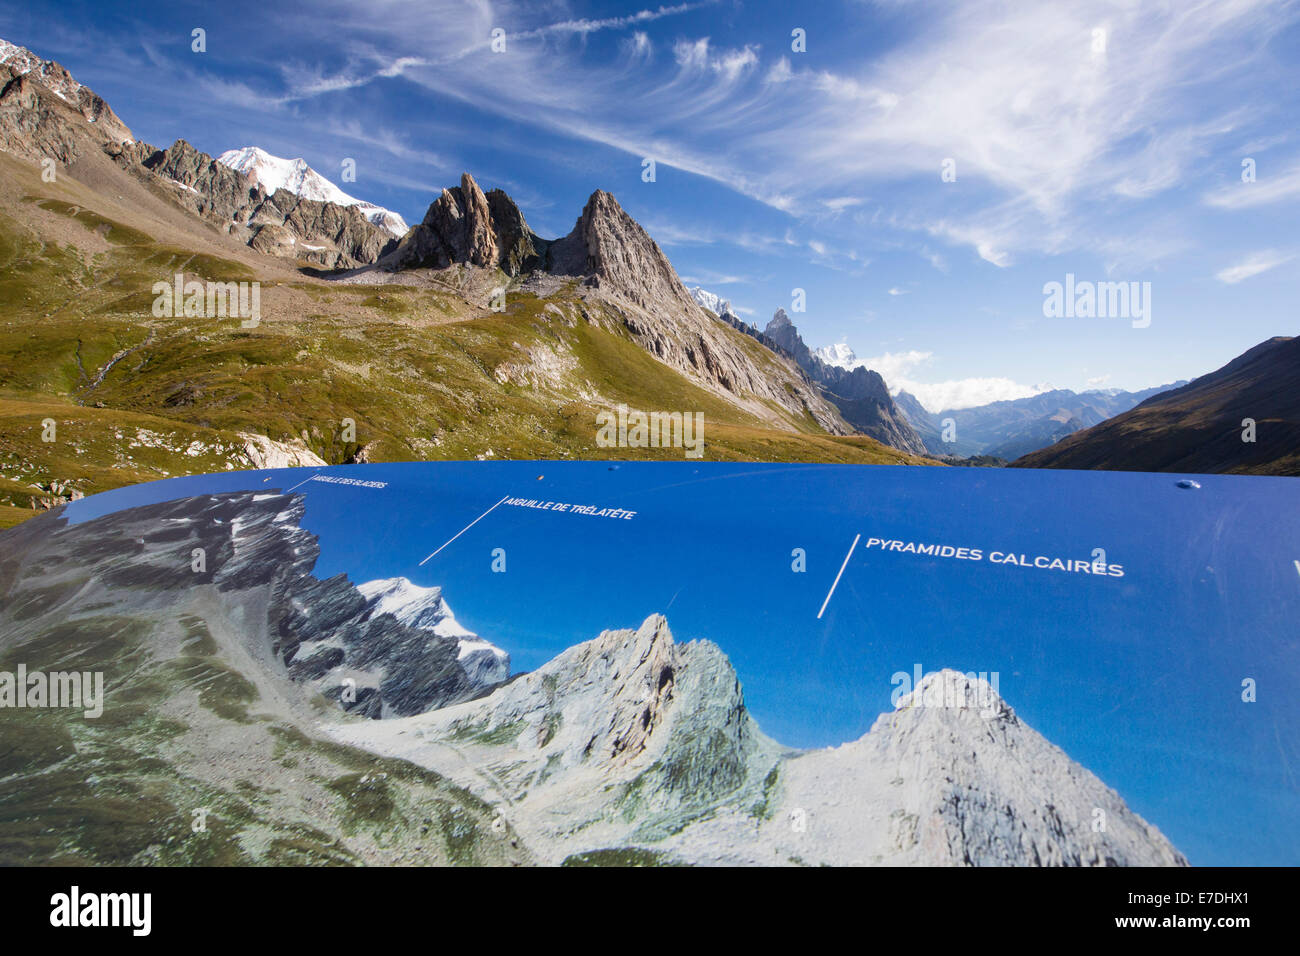 A photo board on a visitor centre in the Vallon de la Lex Blanche below Mont Blanc, Italy, on the Tour de Mont Blanc long distance footpath. Stock Photo